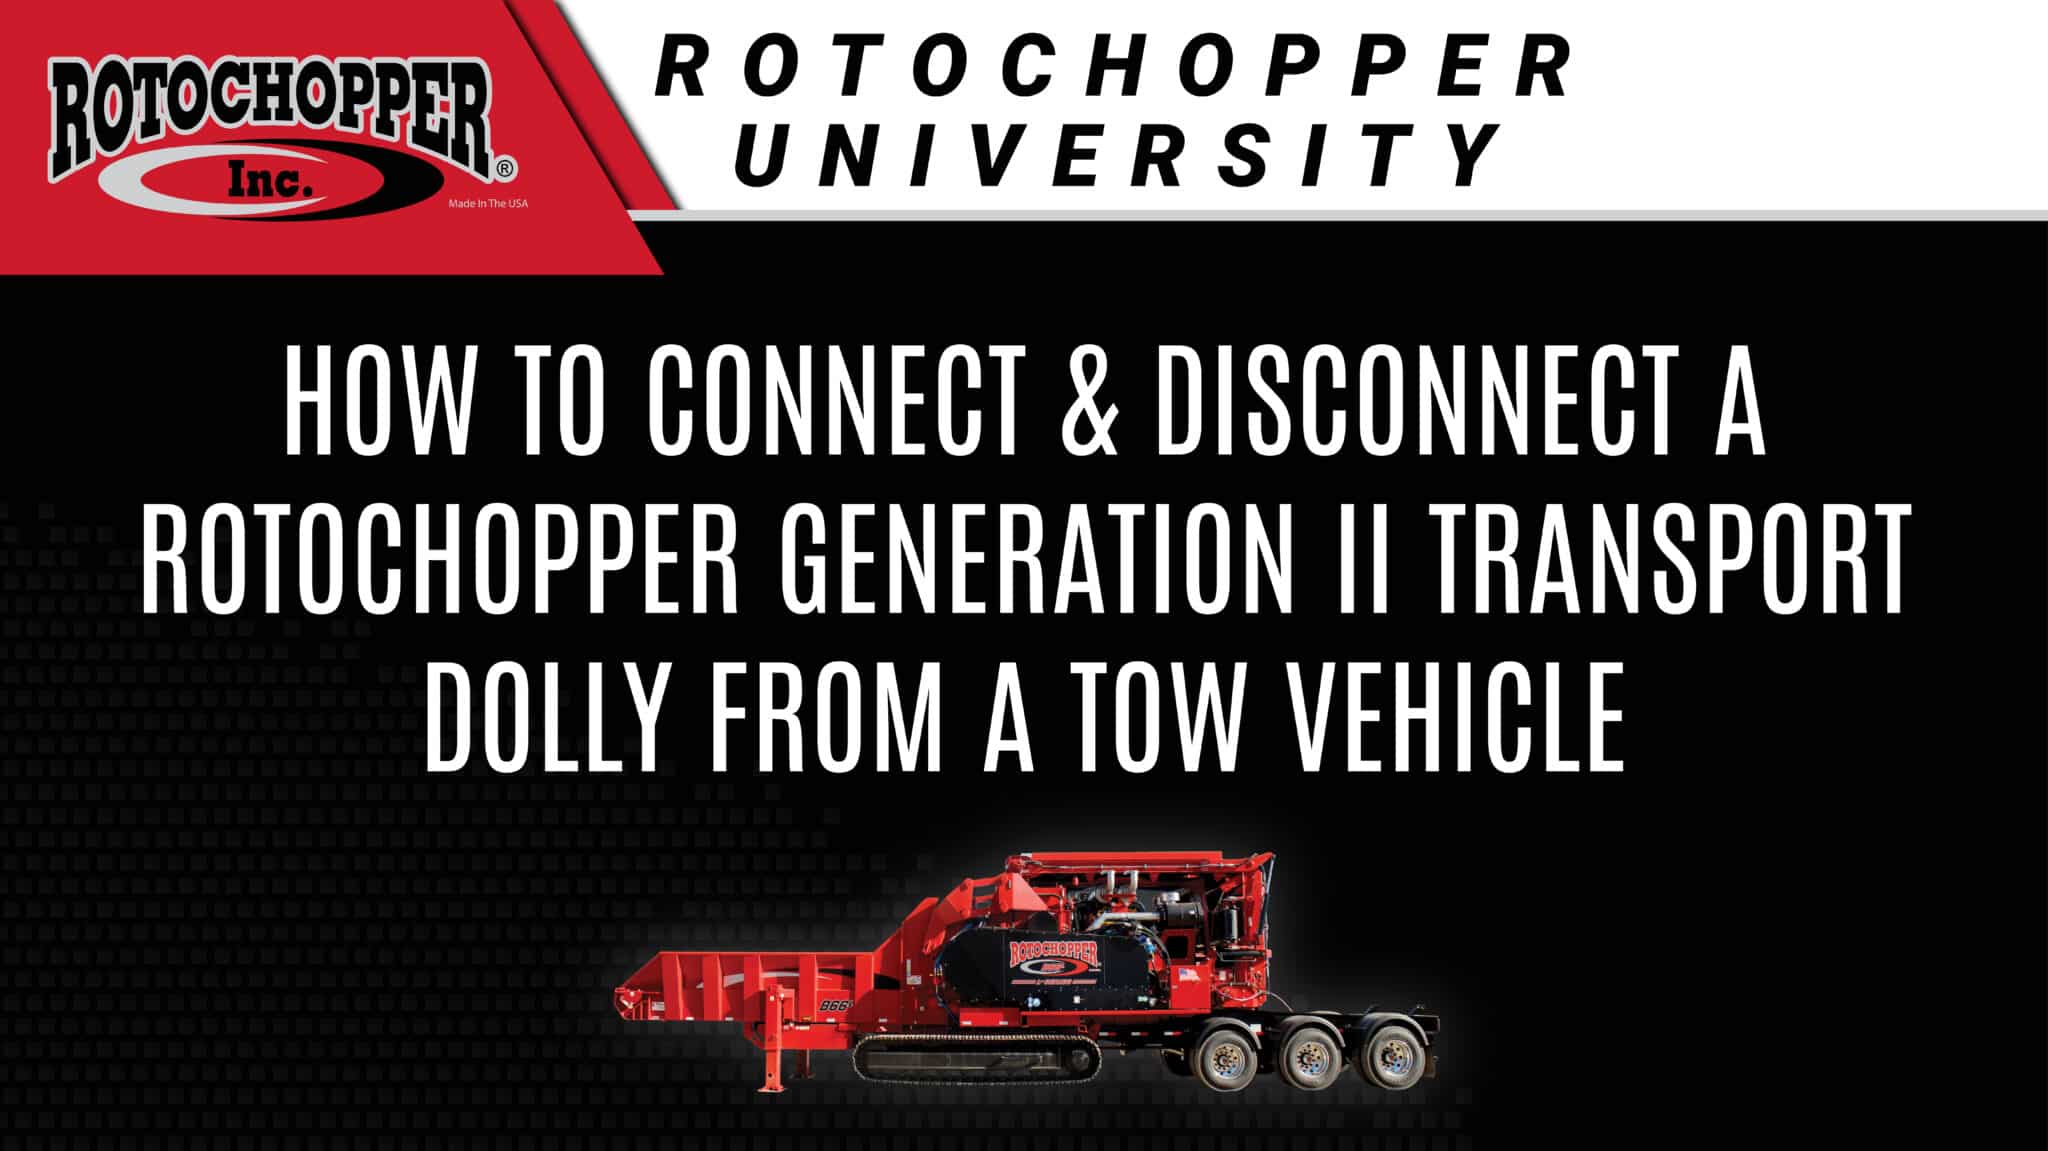 how to connect and disconnect a tow vehicle from a rotochopper generation ii transport dolly